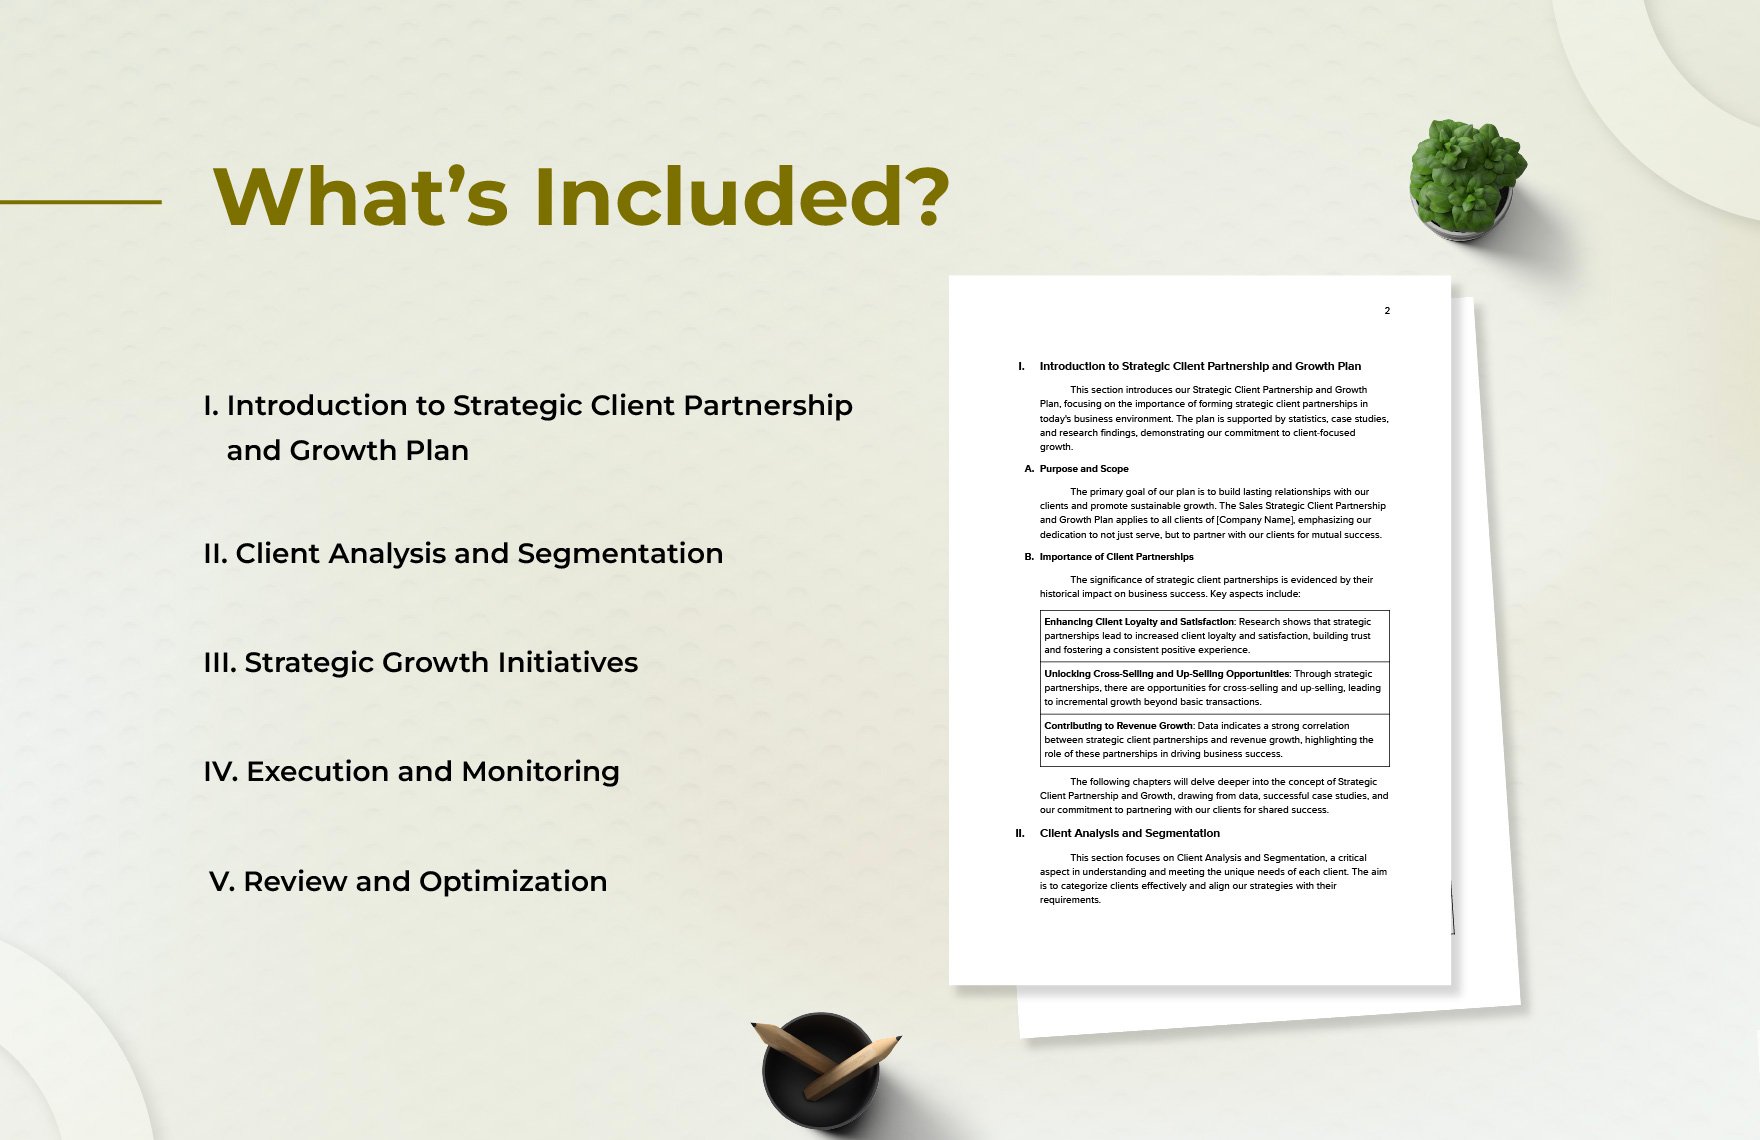 Sales Strategic Client Partnership and Growth Plan Template